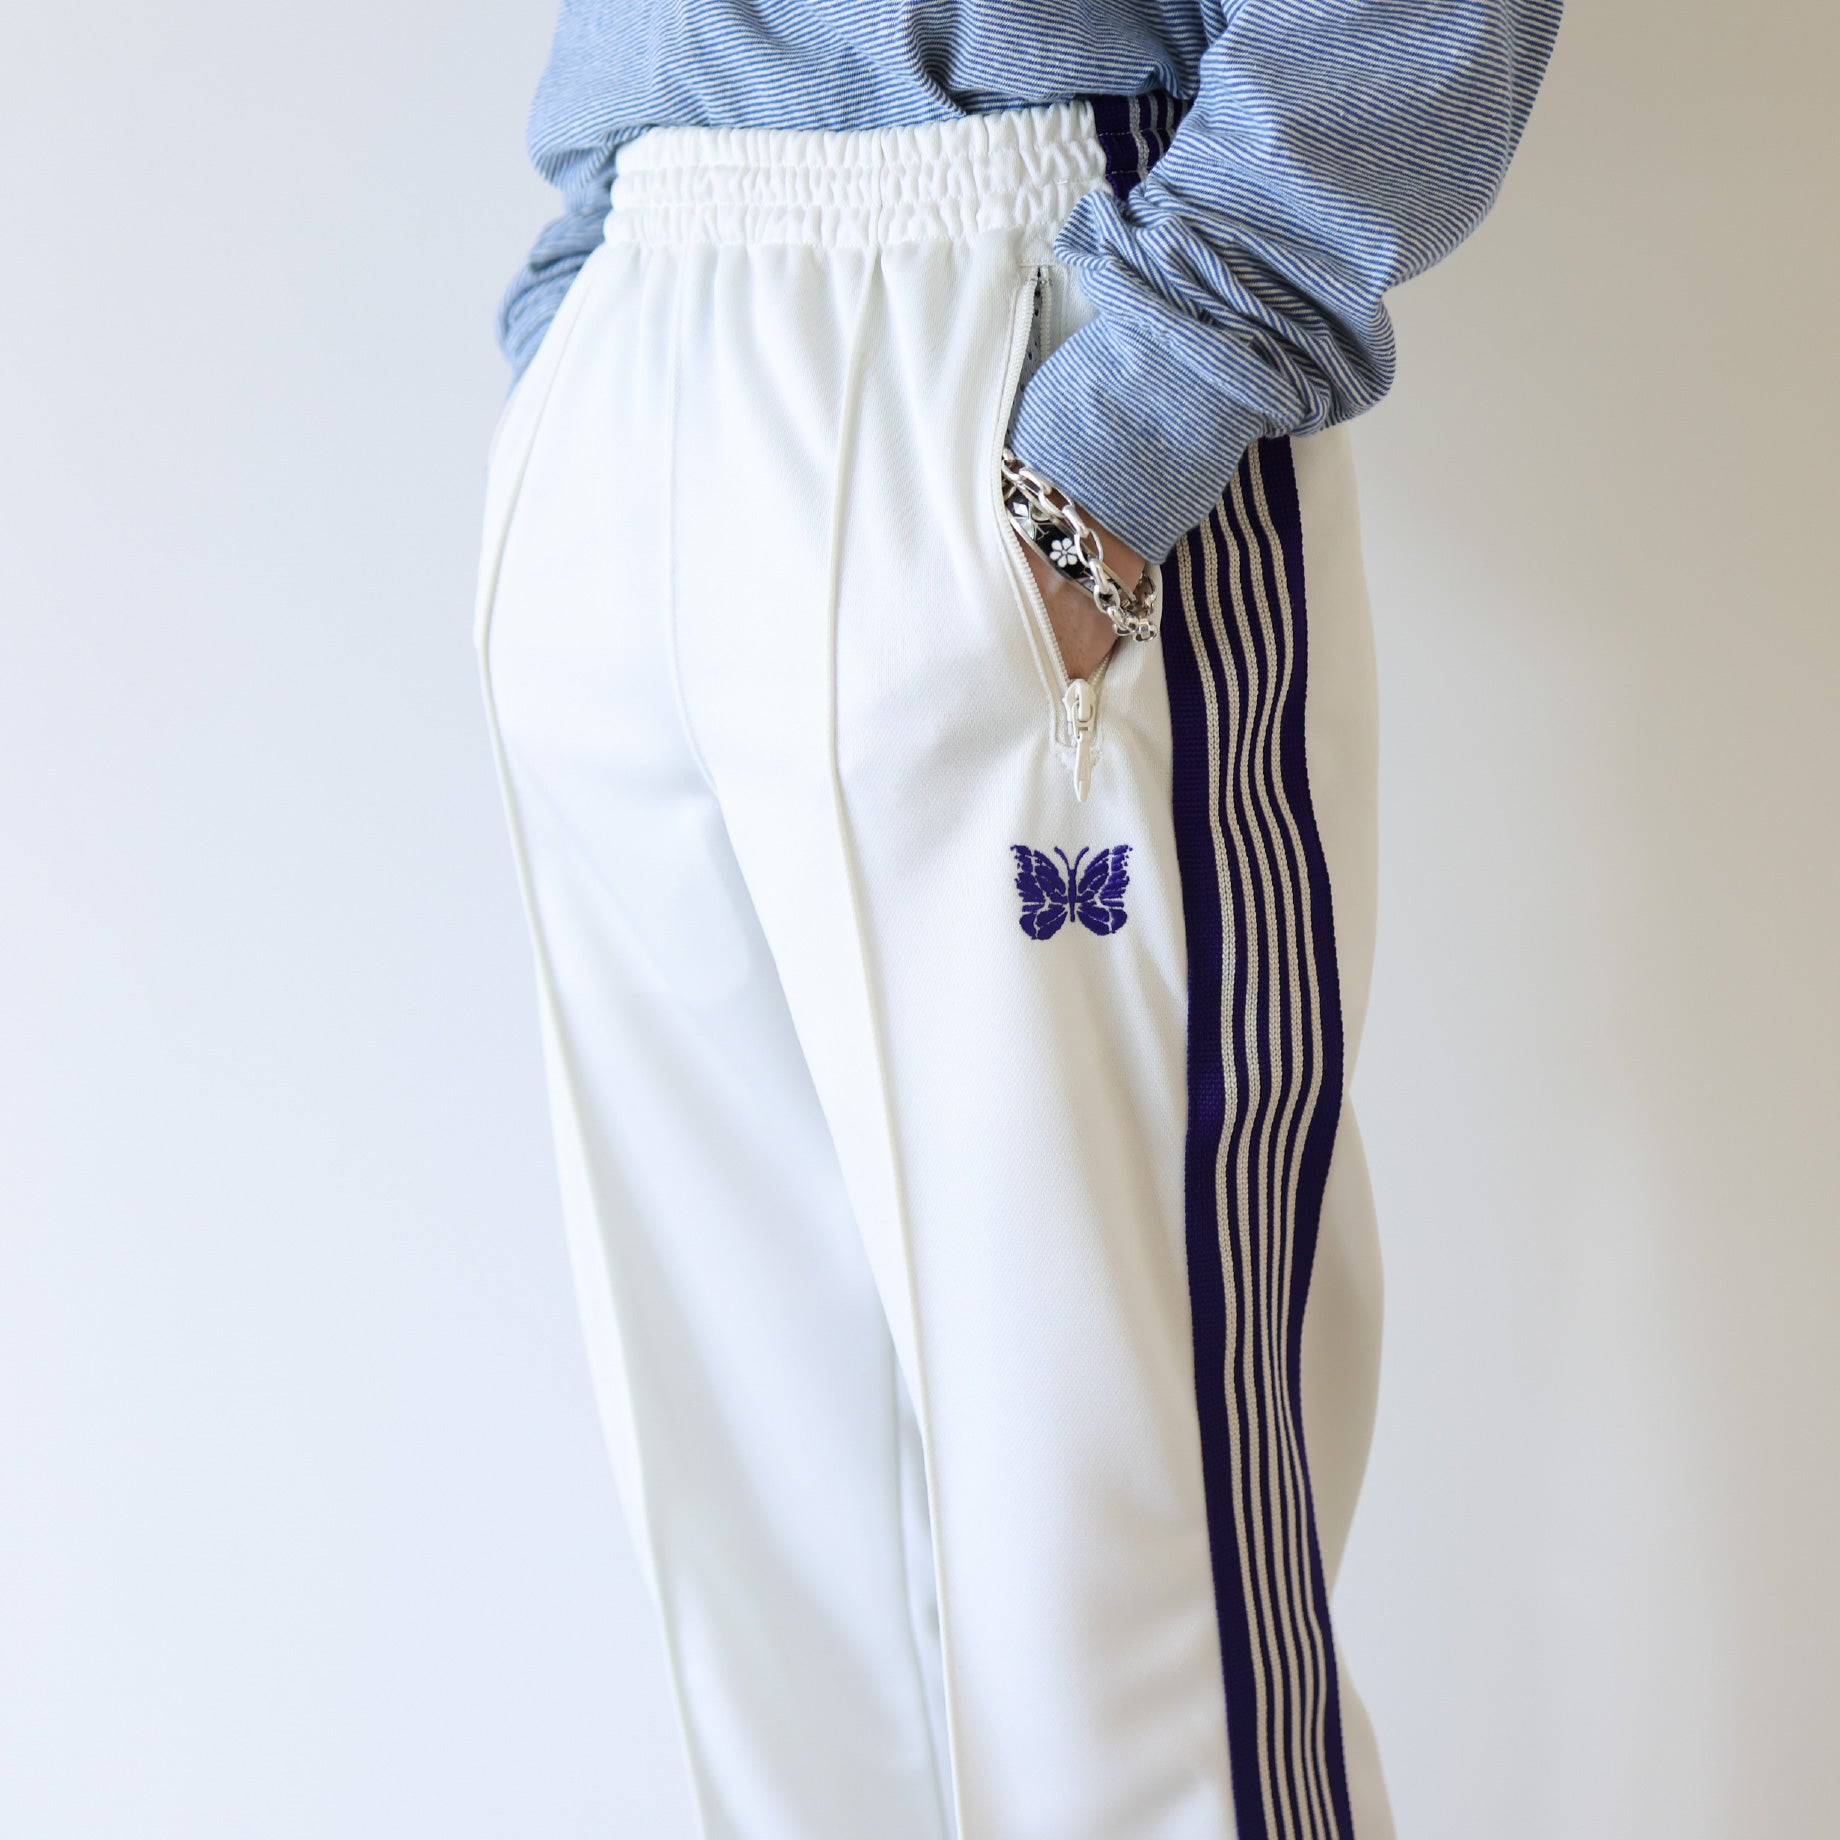 TRACK PANT - POLY SMOOTH / ICE WHT Sサイズ